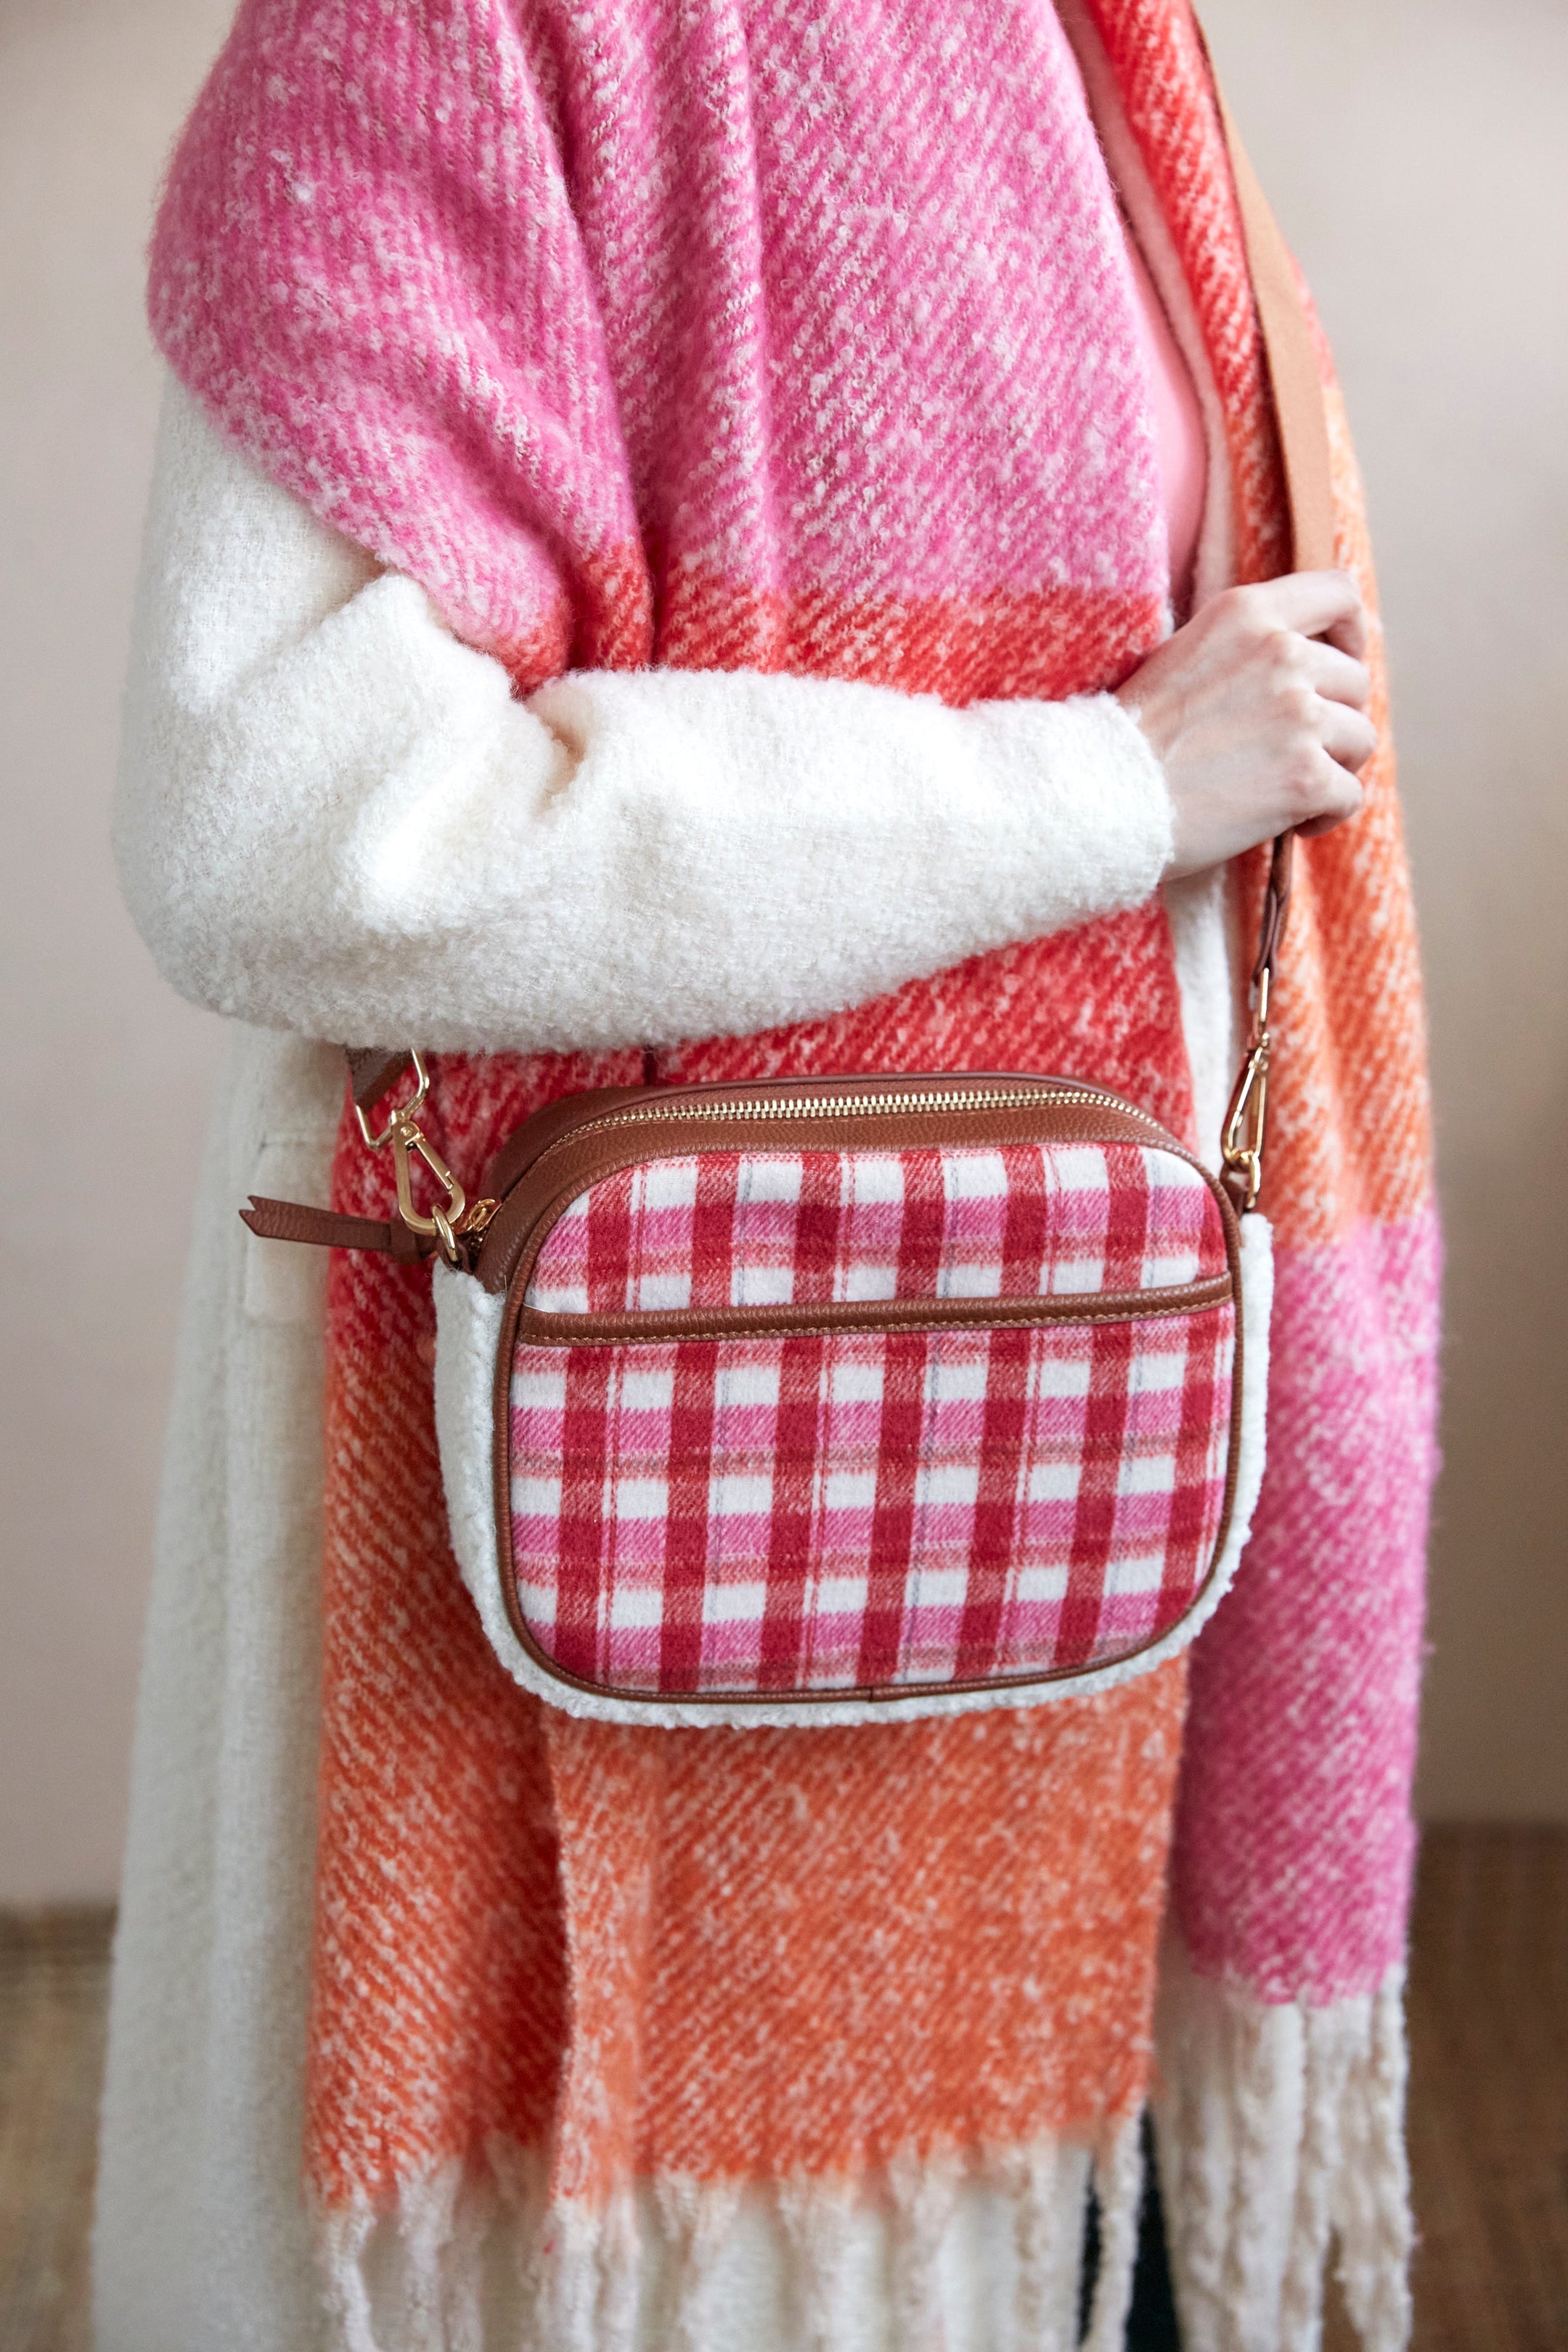 Plaid Mirabel Camera Cross-body Bag, Pink and Red